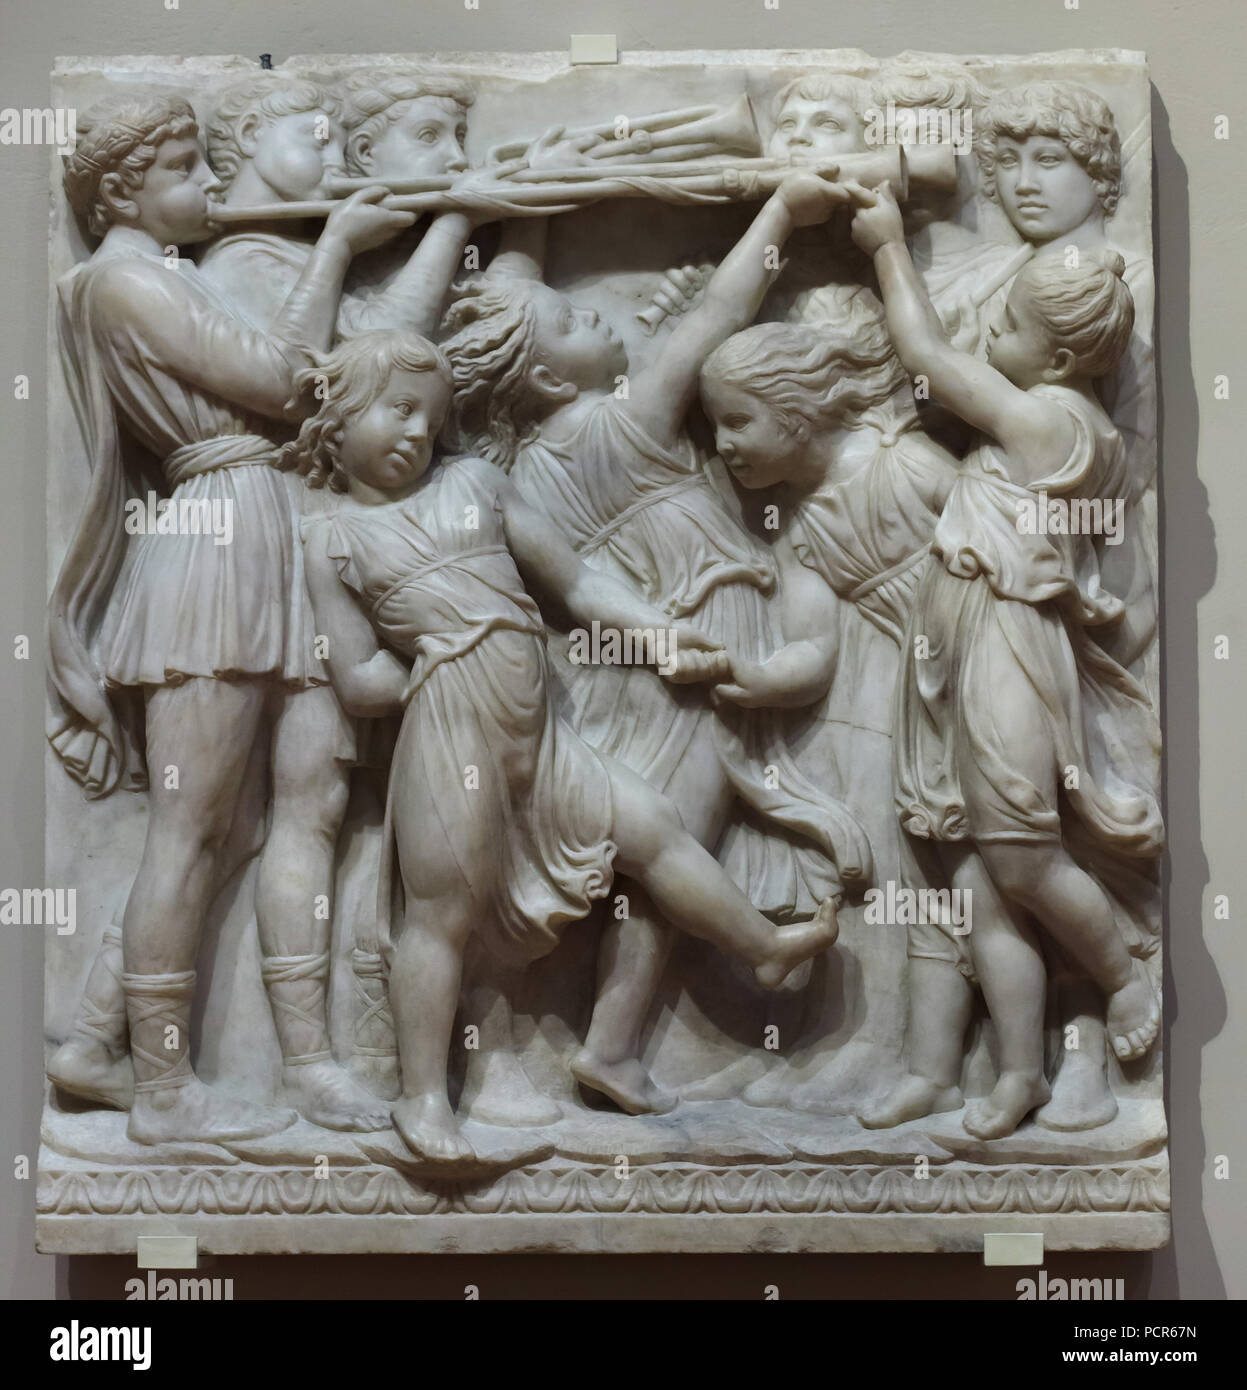 Young dancers and musicians depicted in the marble relief illustrating the Psalm 150 from the Cantoria (singing gallery) designed by Italian Renaissance sculptor Luca della Robbia (1432-1438) for the Sacristy of the Florence Cathedral (Cattedrale di Santa Maria del Fiore), now on display in the Museo dell'Opera del Duomo (Museum of the Works of the Florence Cathedral) in Florence, Tuscany, Italy. Stock Photo